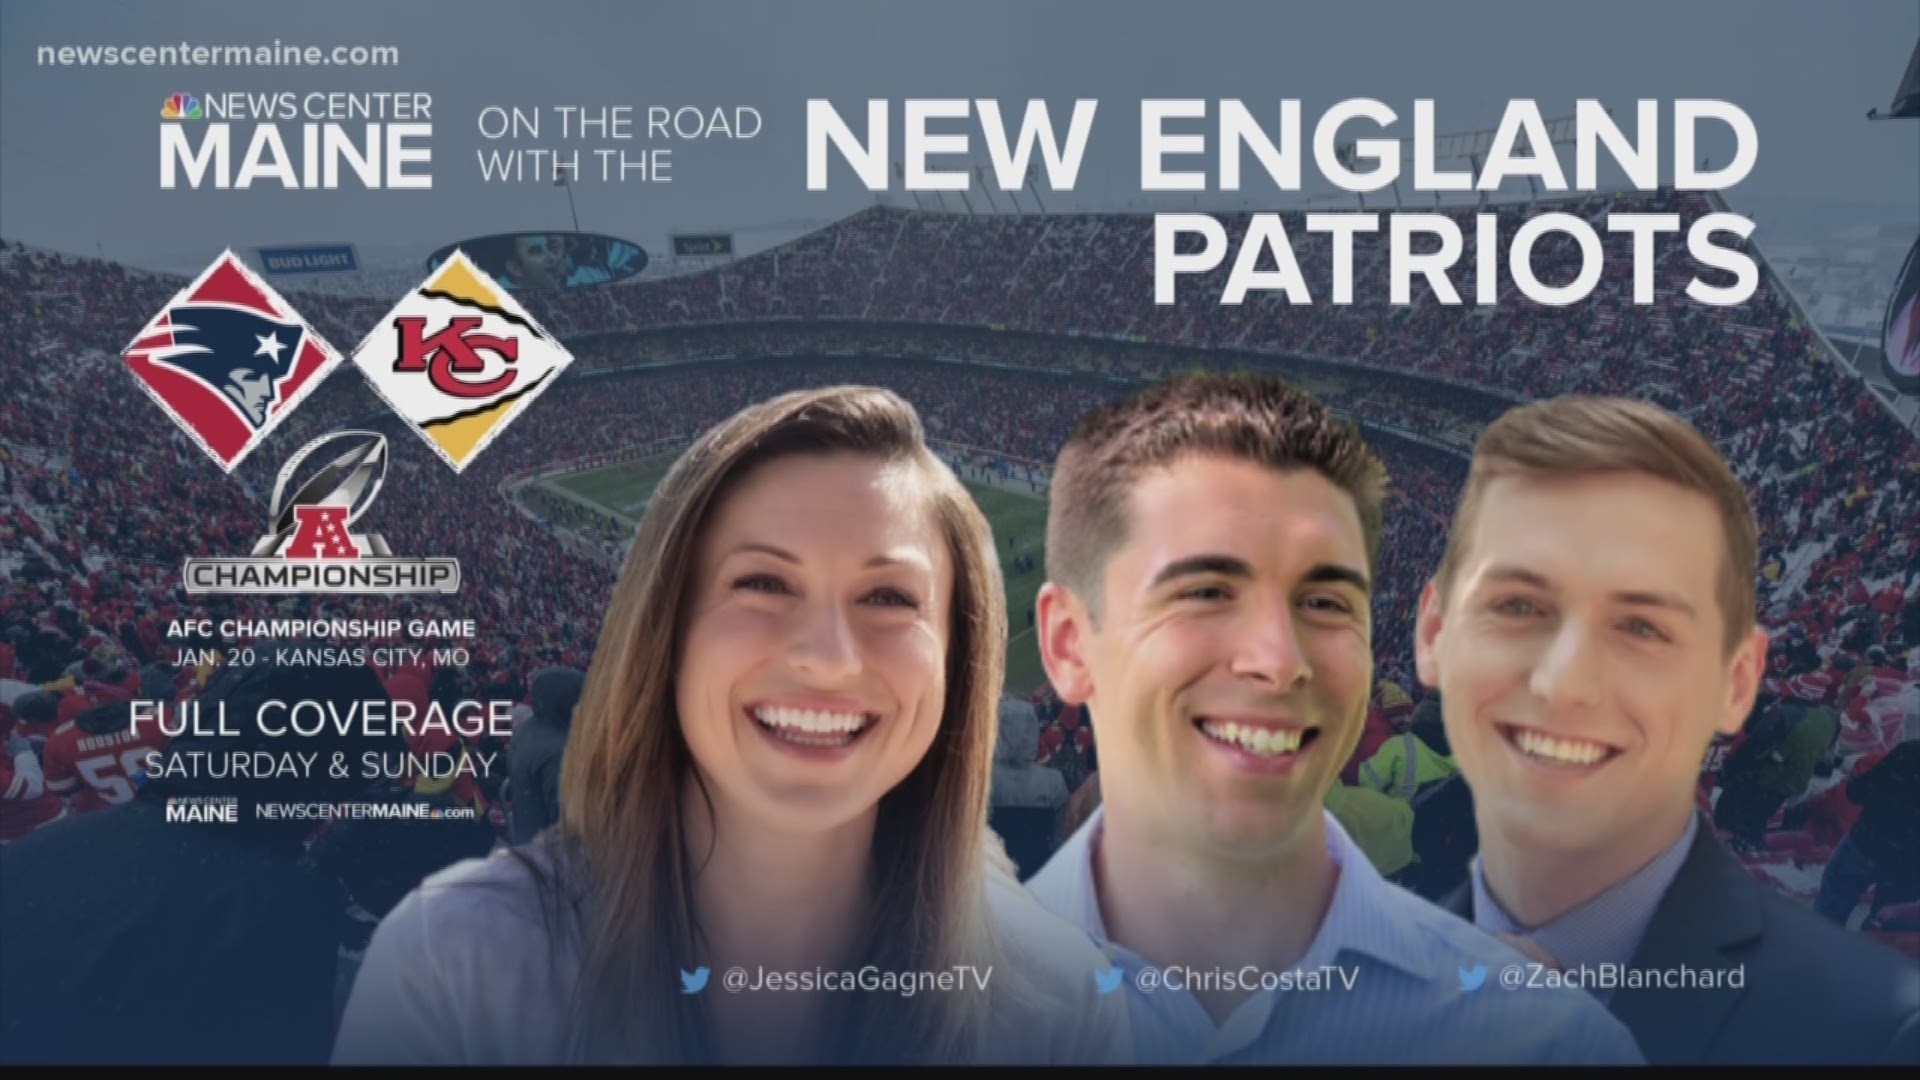 Our team has live coverage from Kansas City as the Patriots prepare to take on the Chiefs in the AFC Championship.